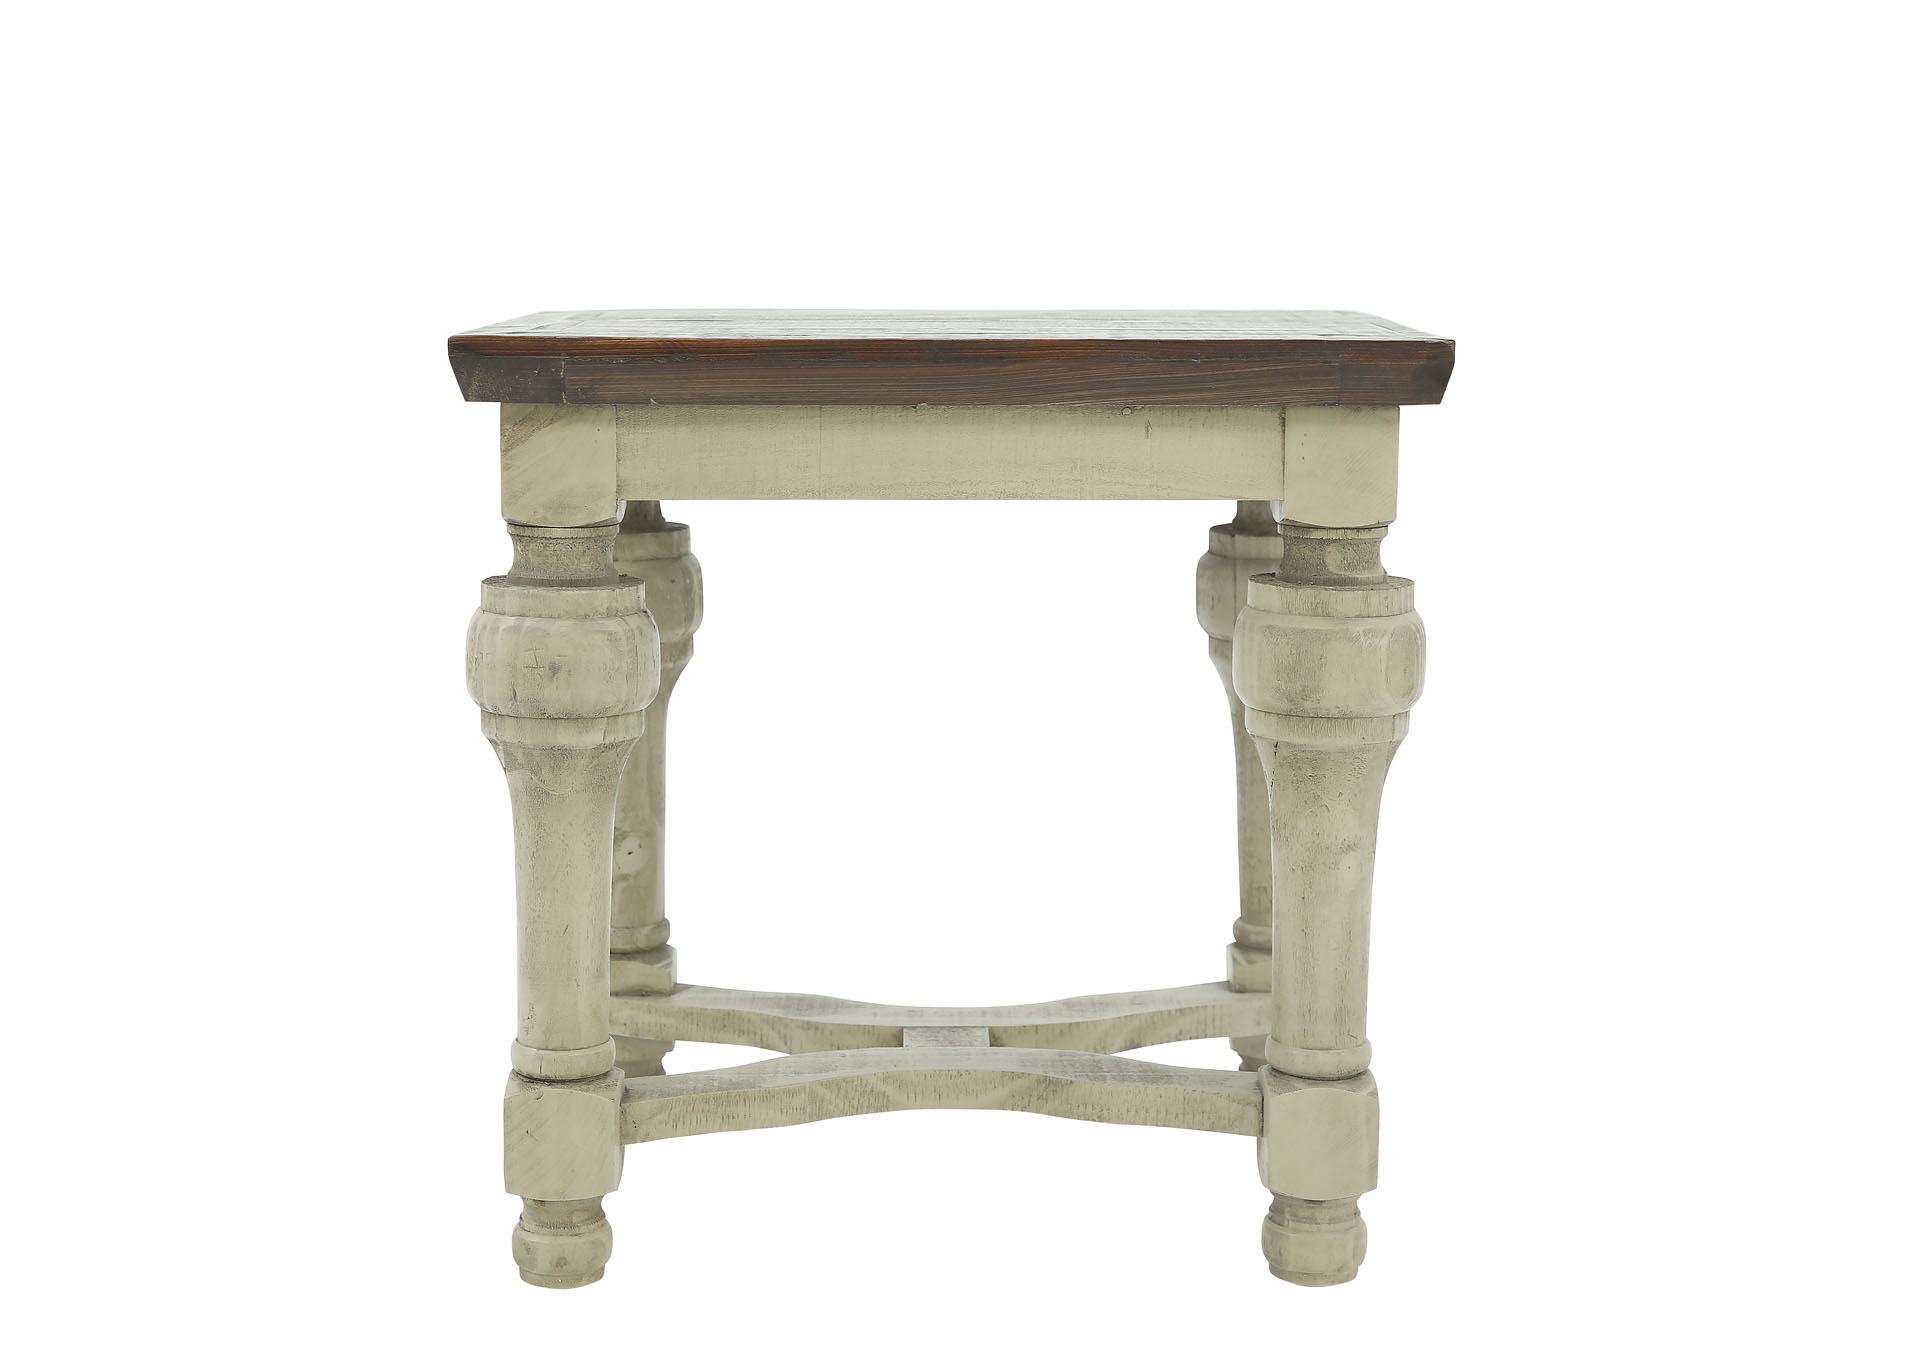 JAMISON CHAIRSIDE TABLE